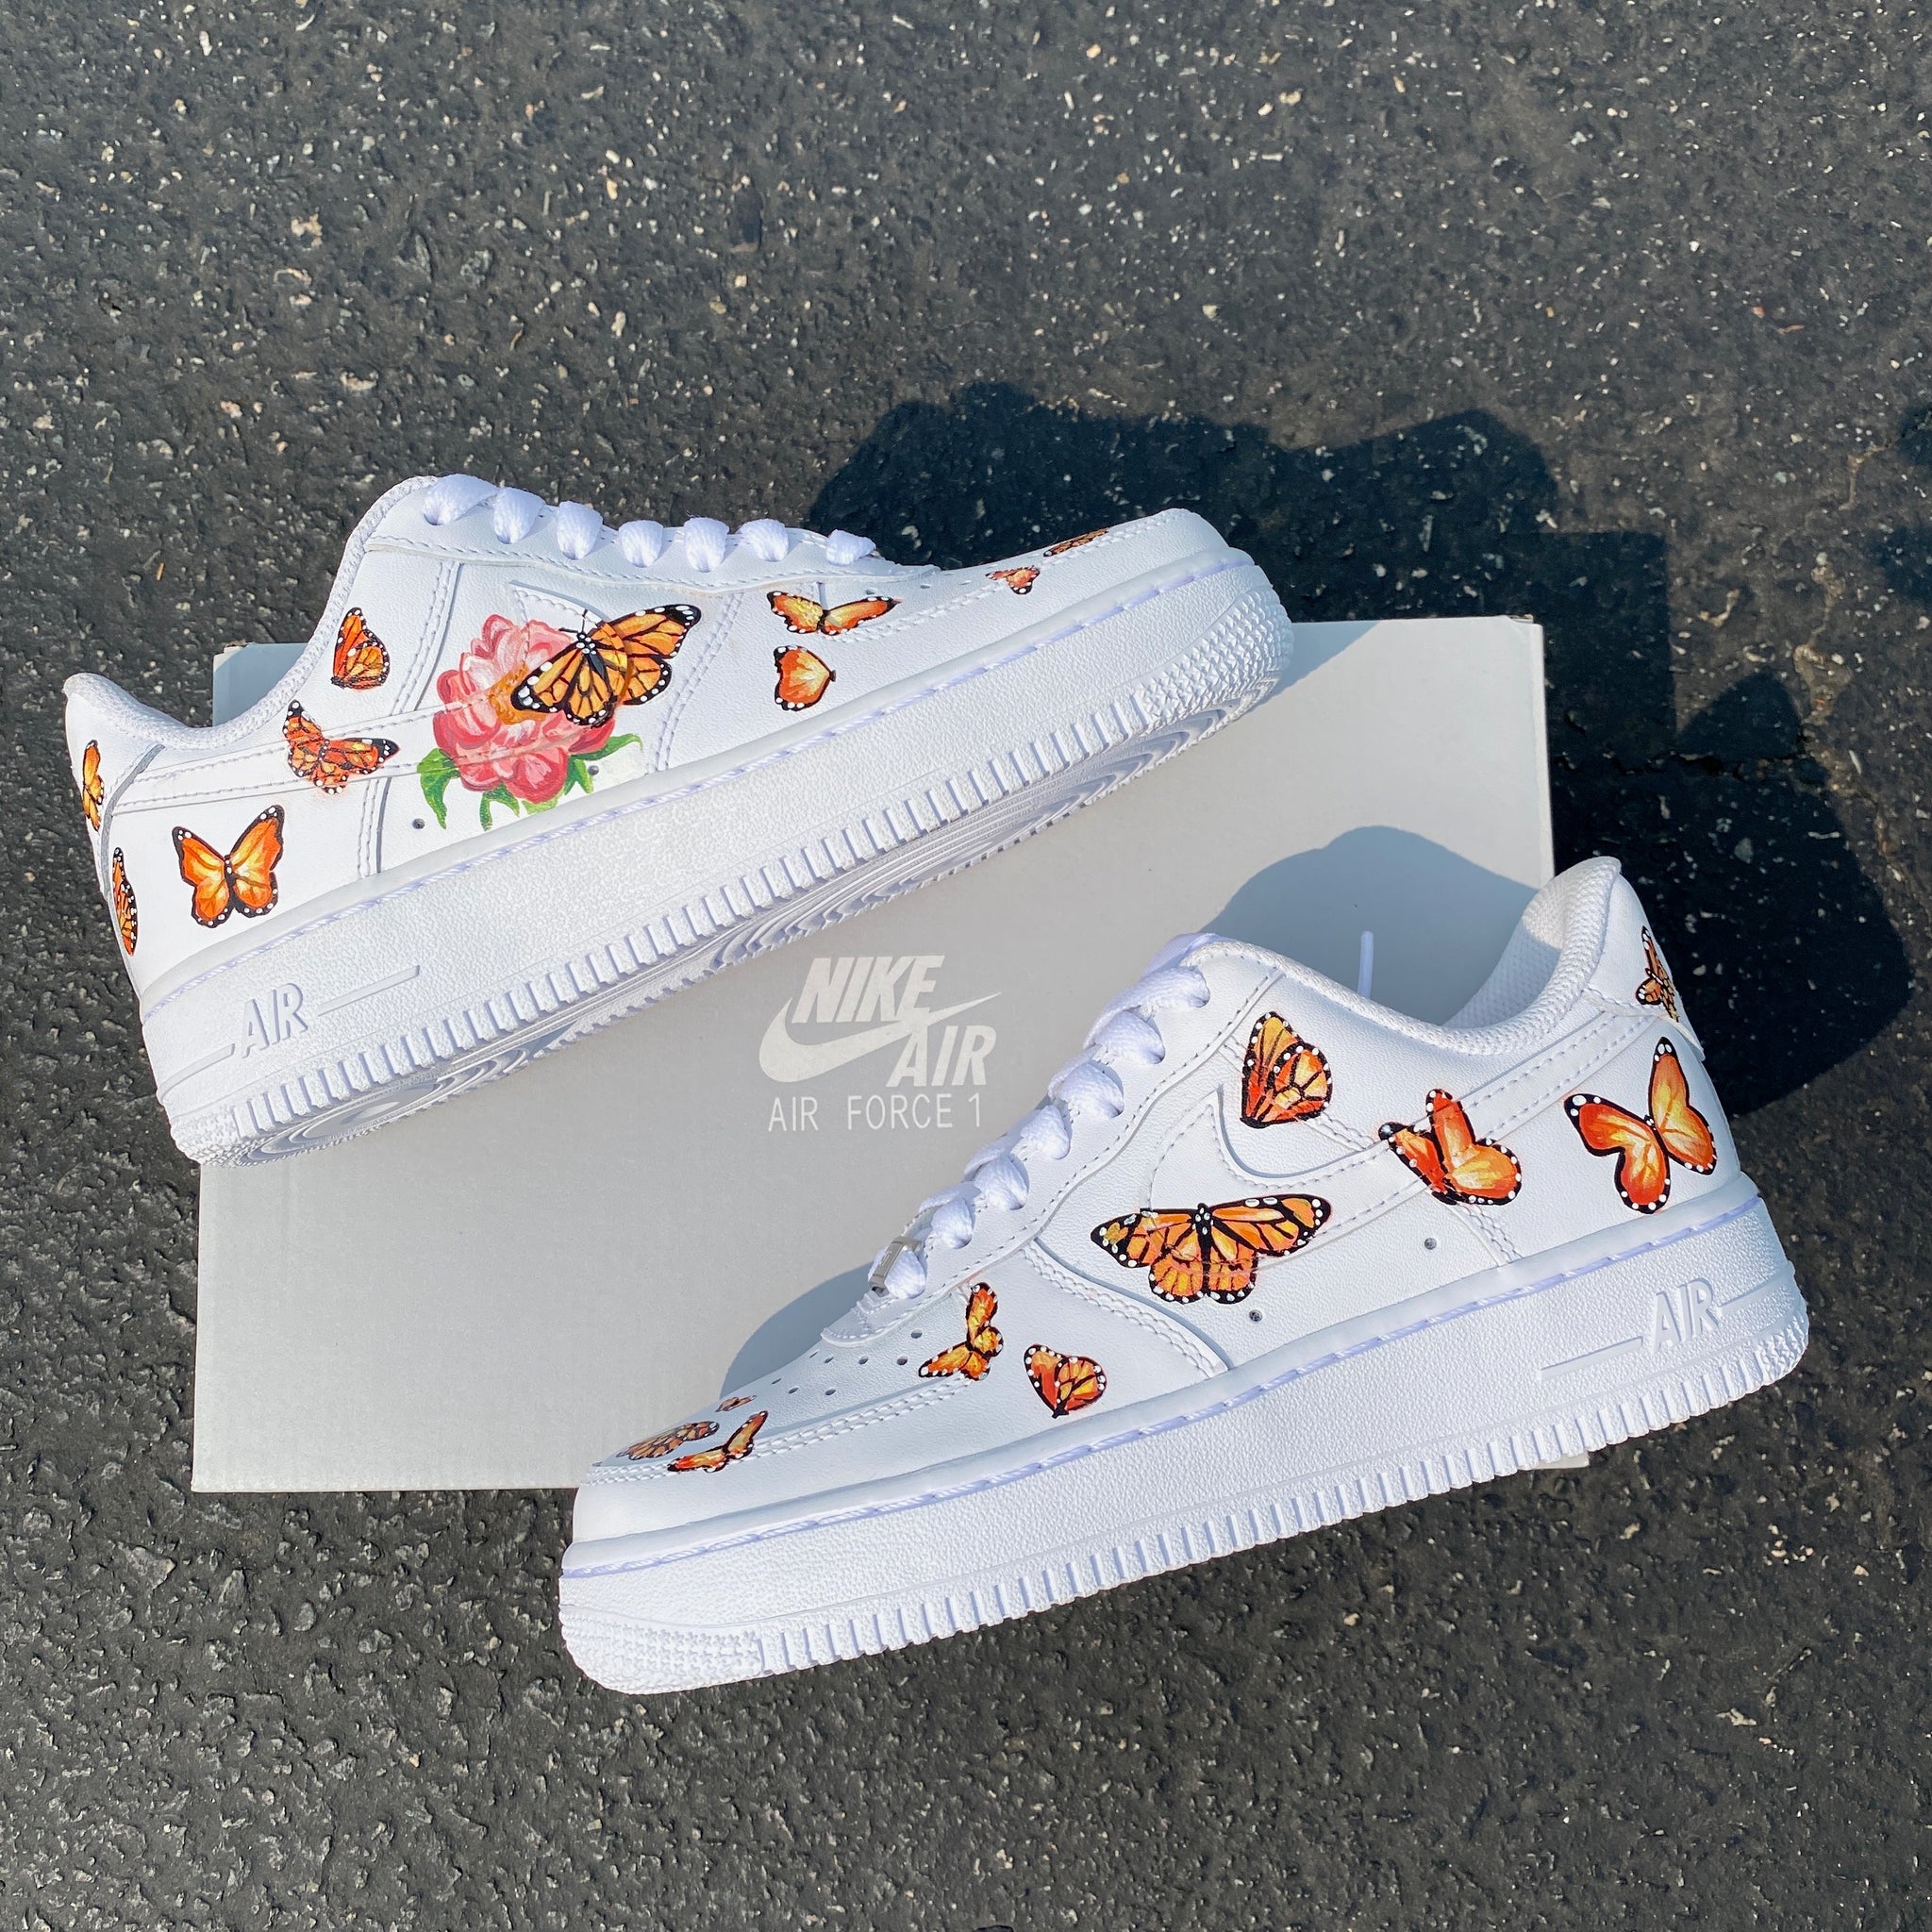 Nike Af1 Low - 8 Womens - Custom Order - Invoice 2 of 2 – B Street Shoes